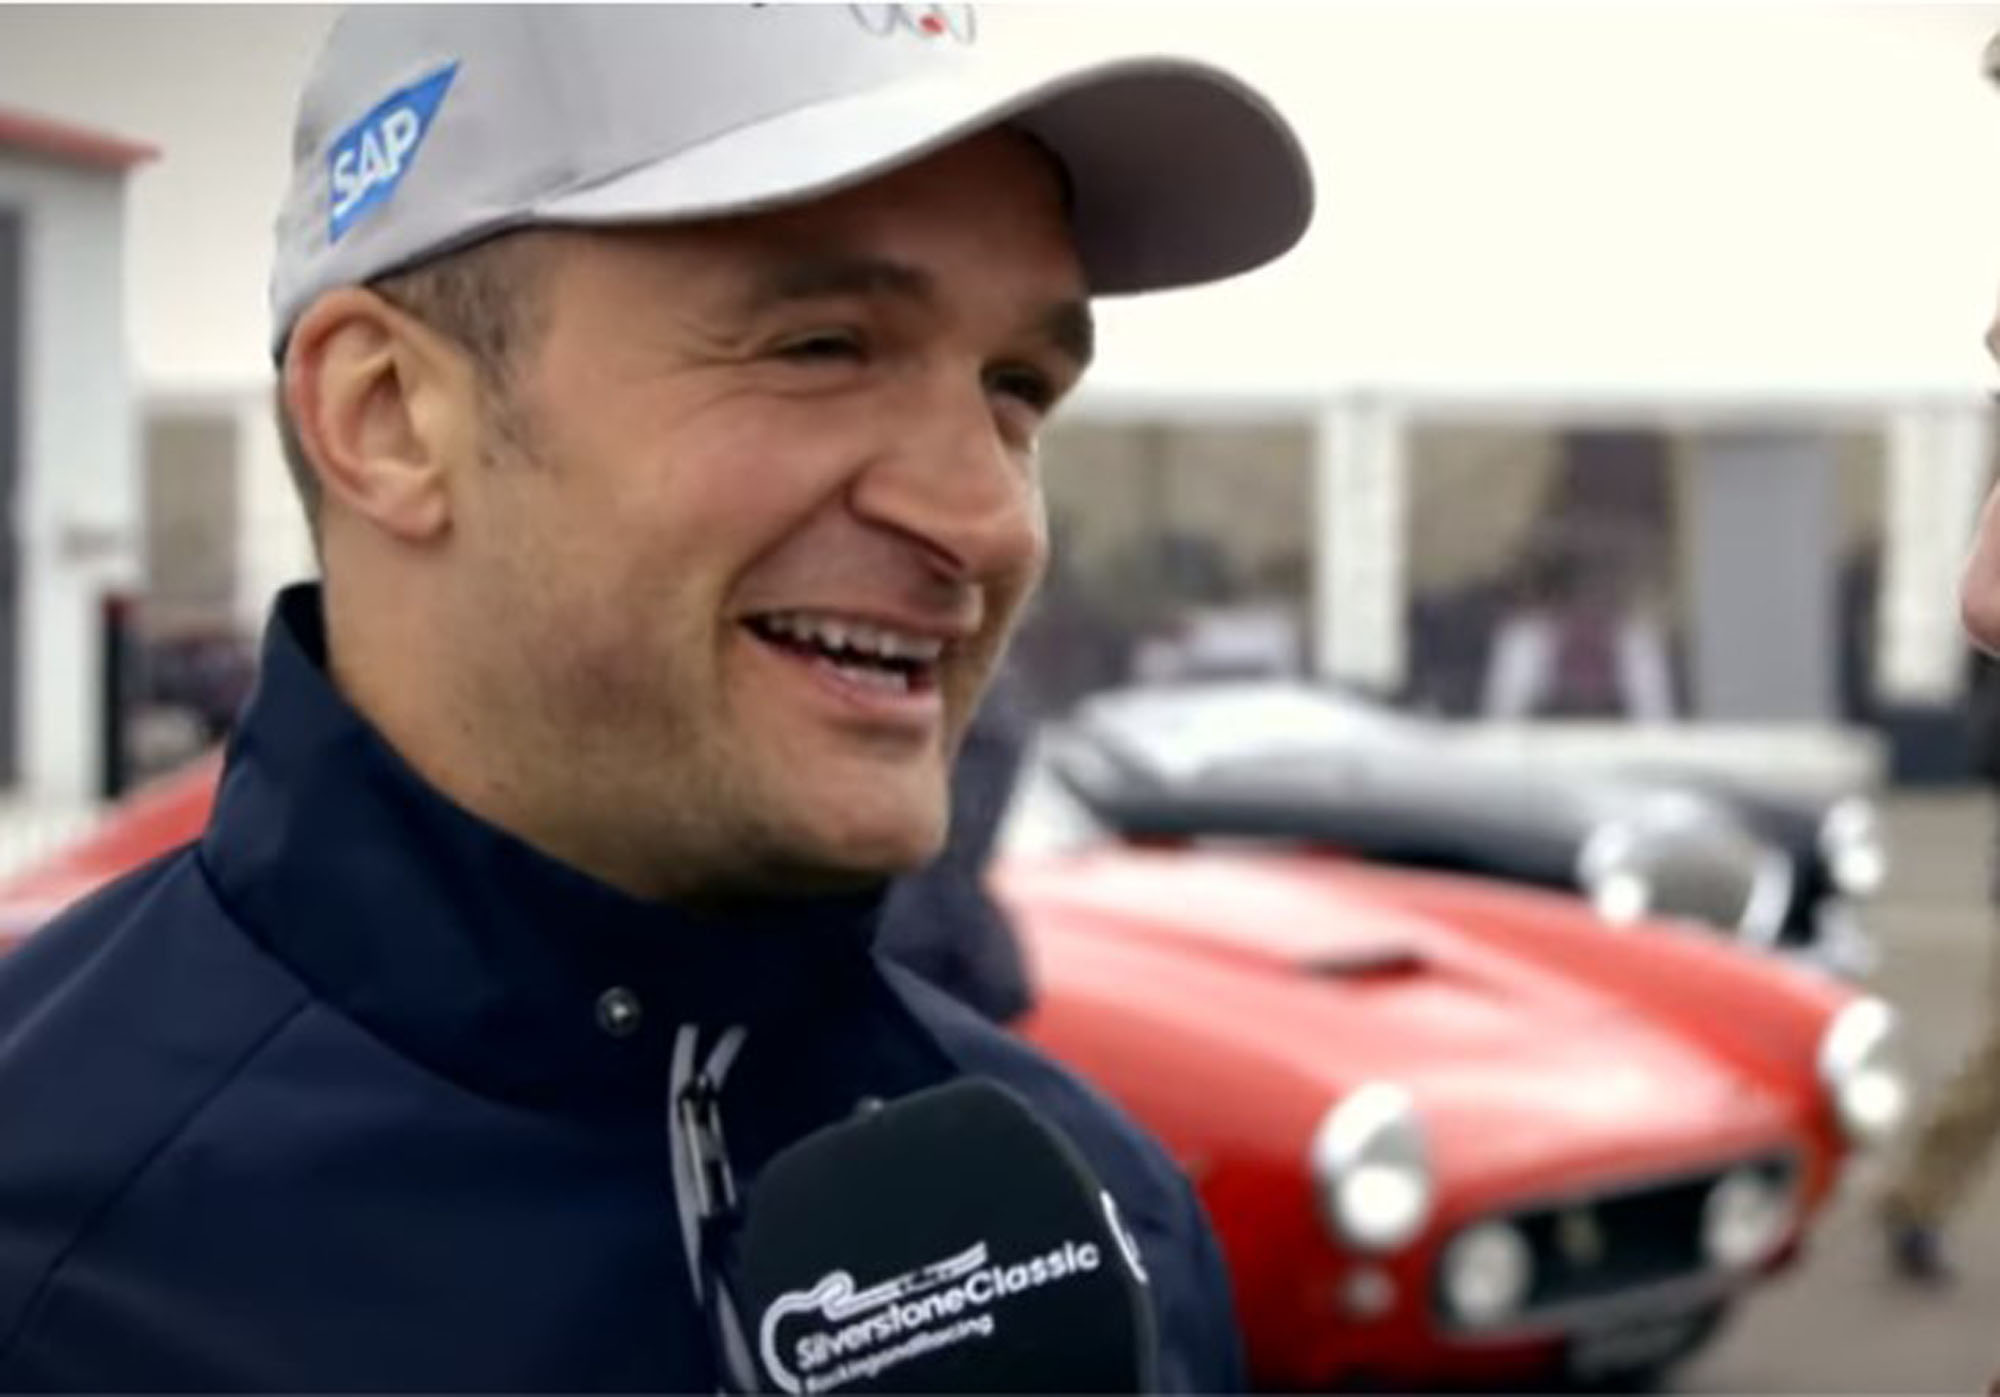 Colin Turkington being interviewed at The Classic at Silverstone in front of a red classic car